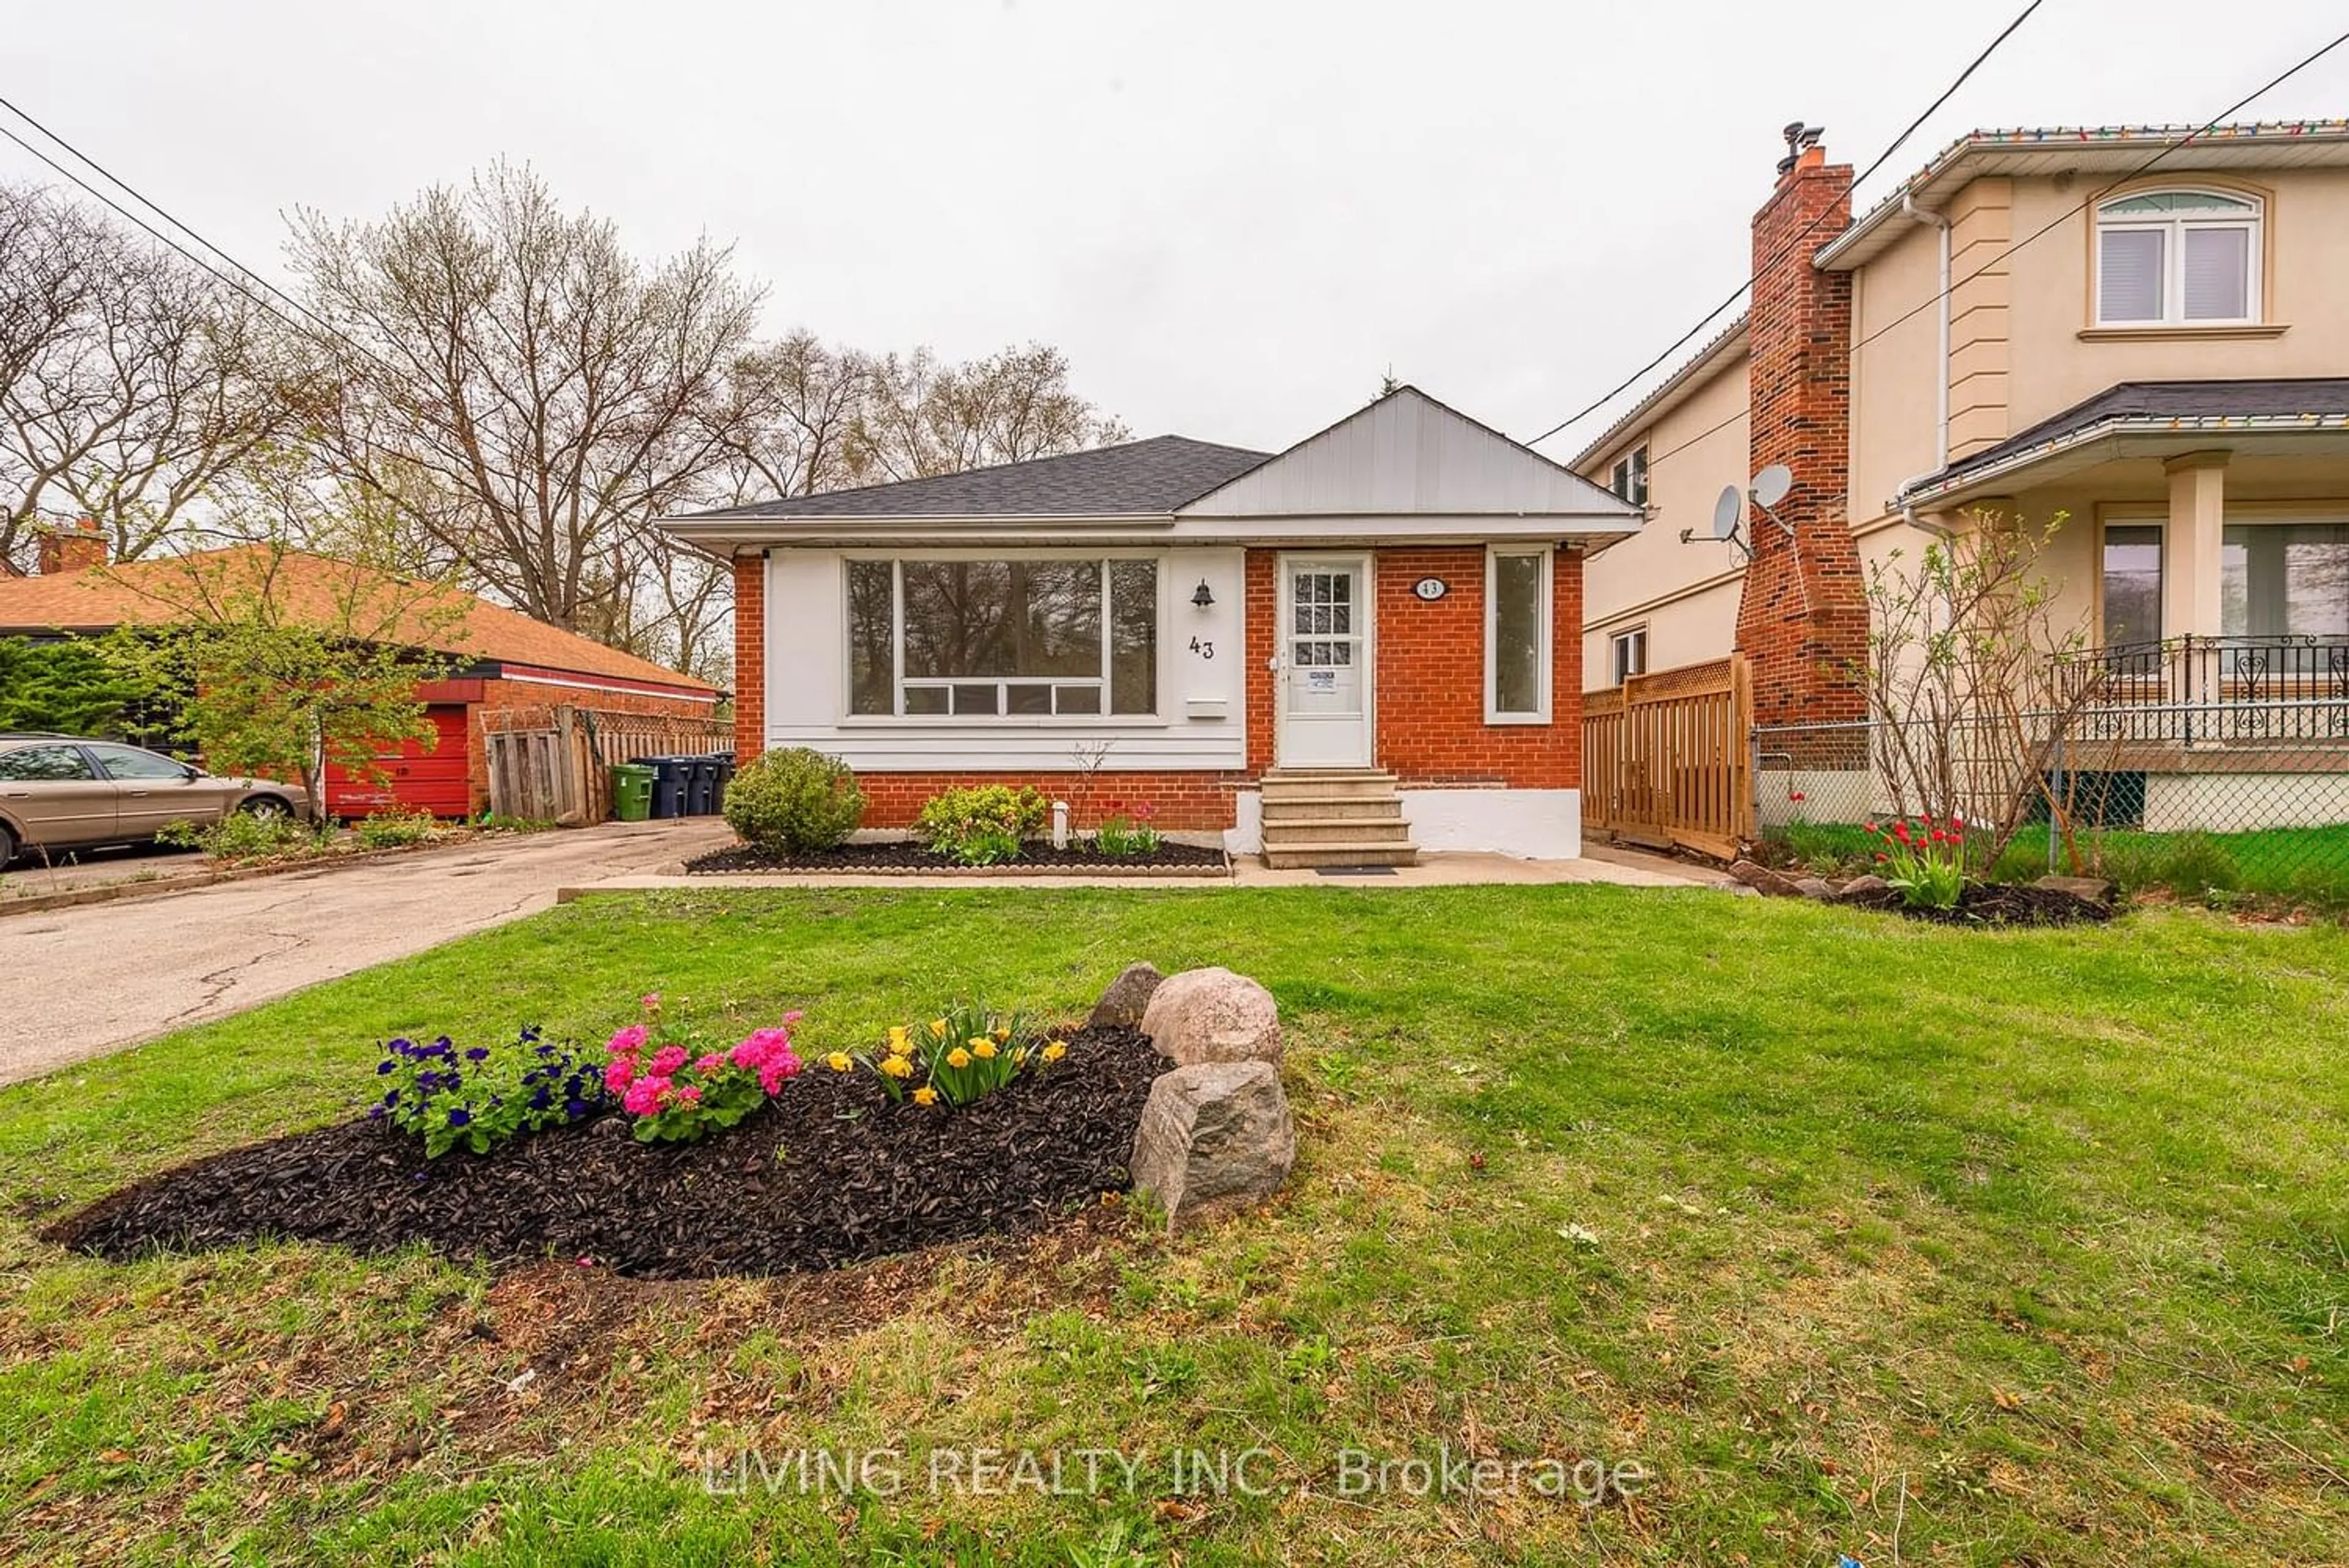 Home with brick exterior material for 43 Ridge Point Cres, Toronto Ontario M6M 2Z7